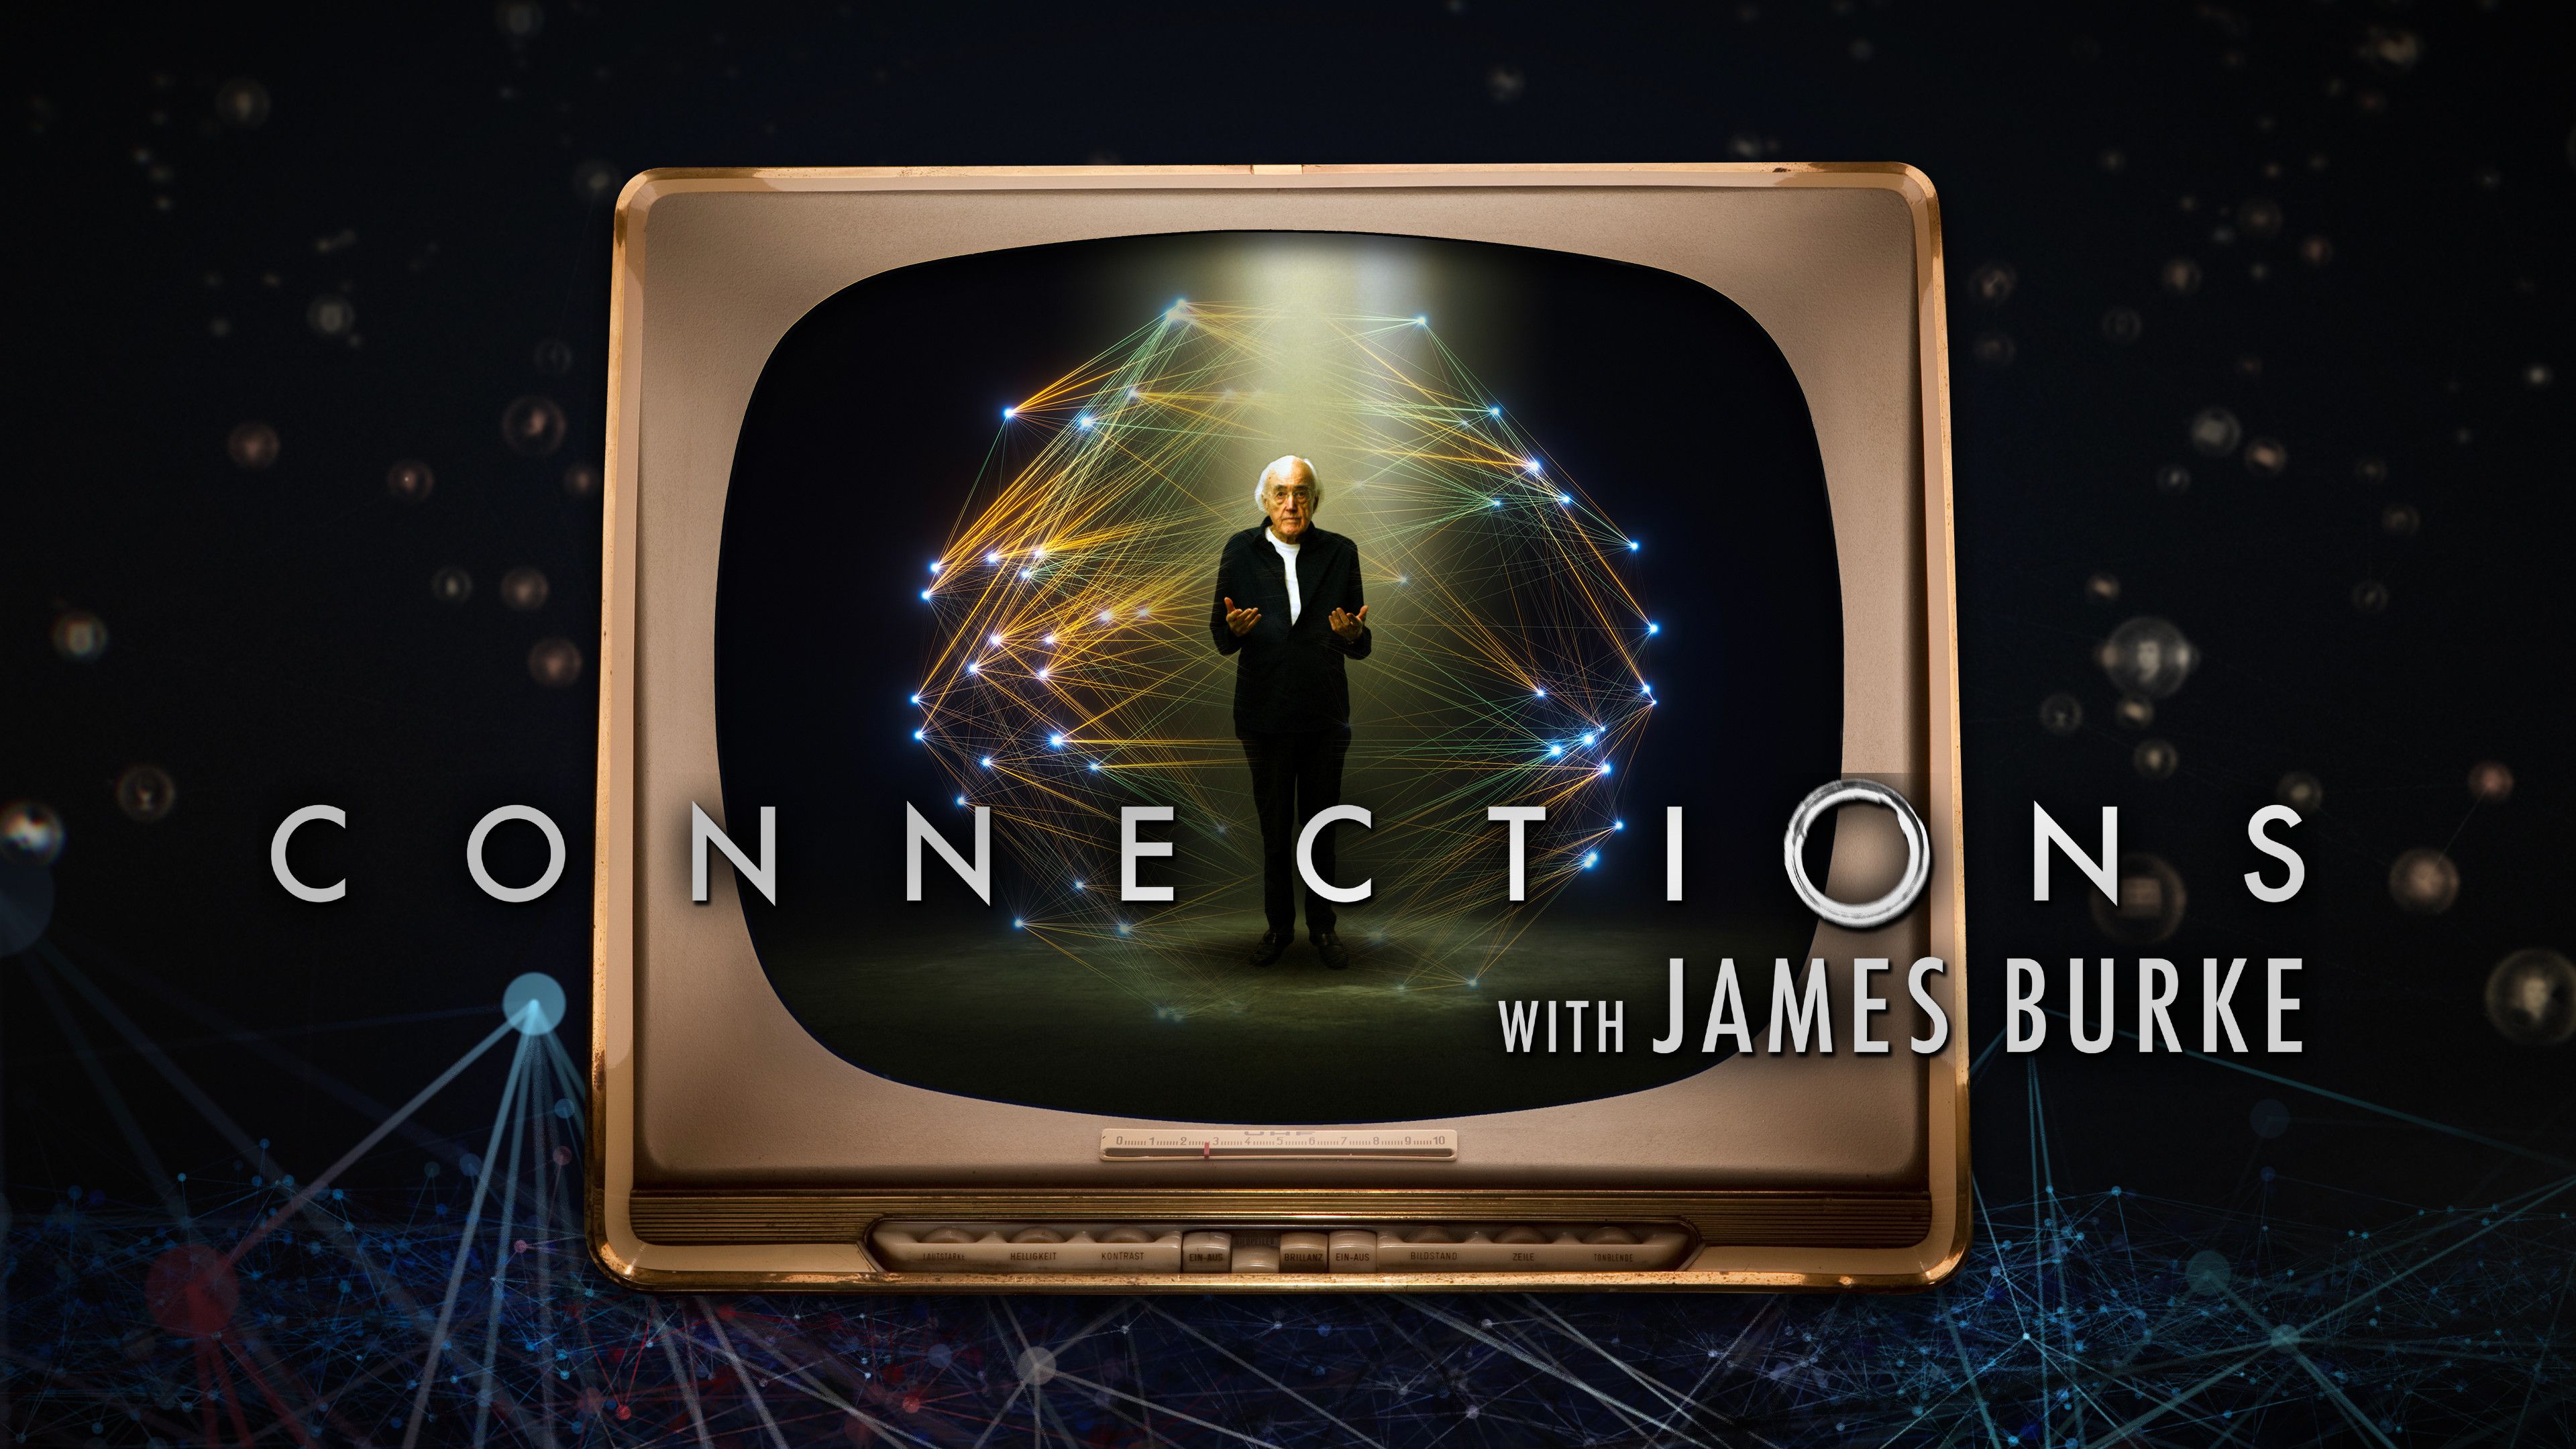 Connections with James Burke